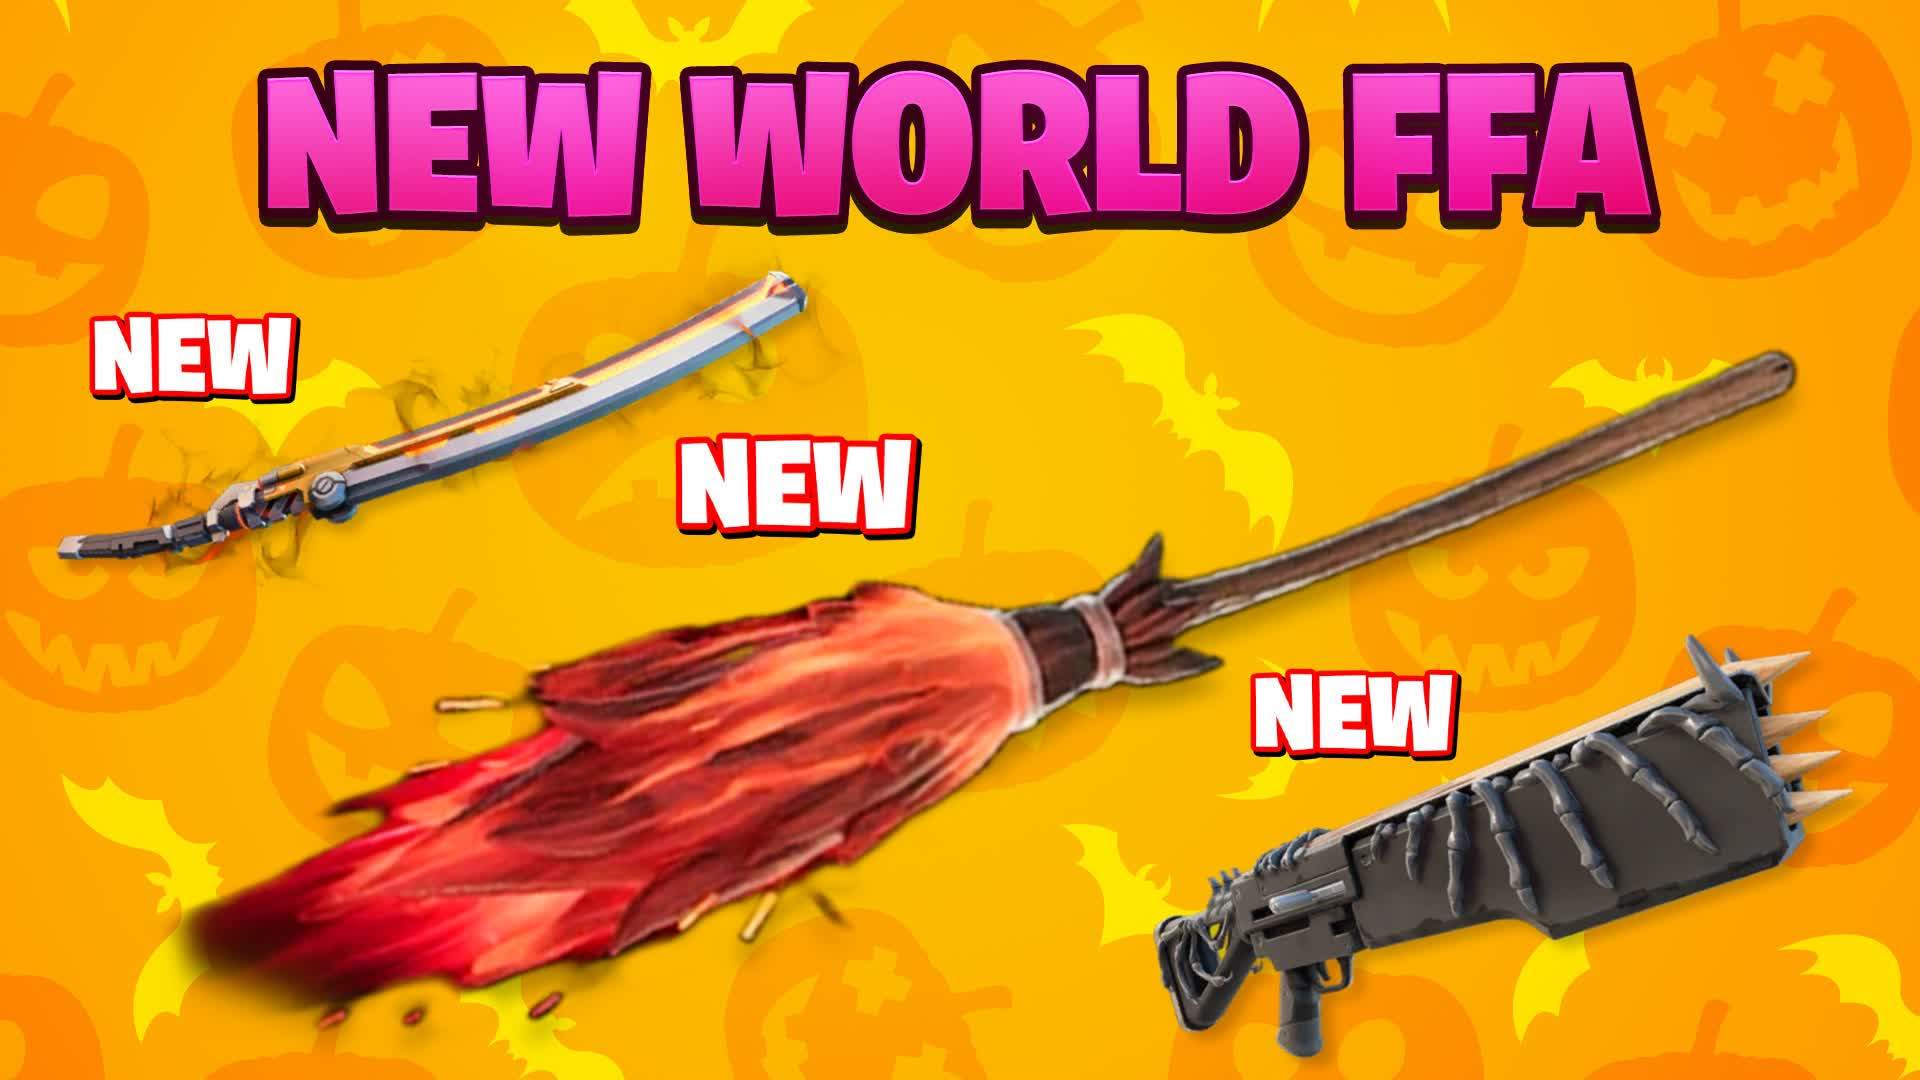 🎃 NEW WORLD FFA - ALL WEAPONS & CARS